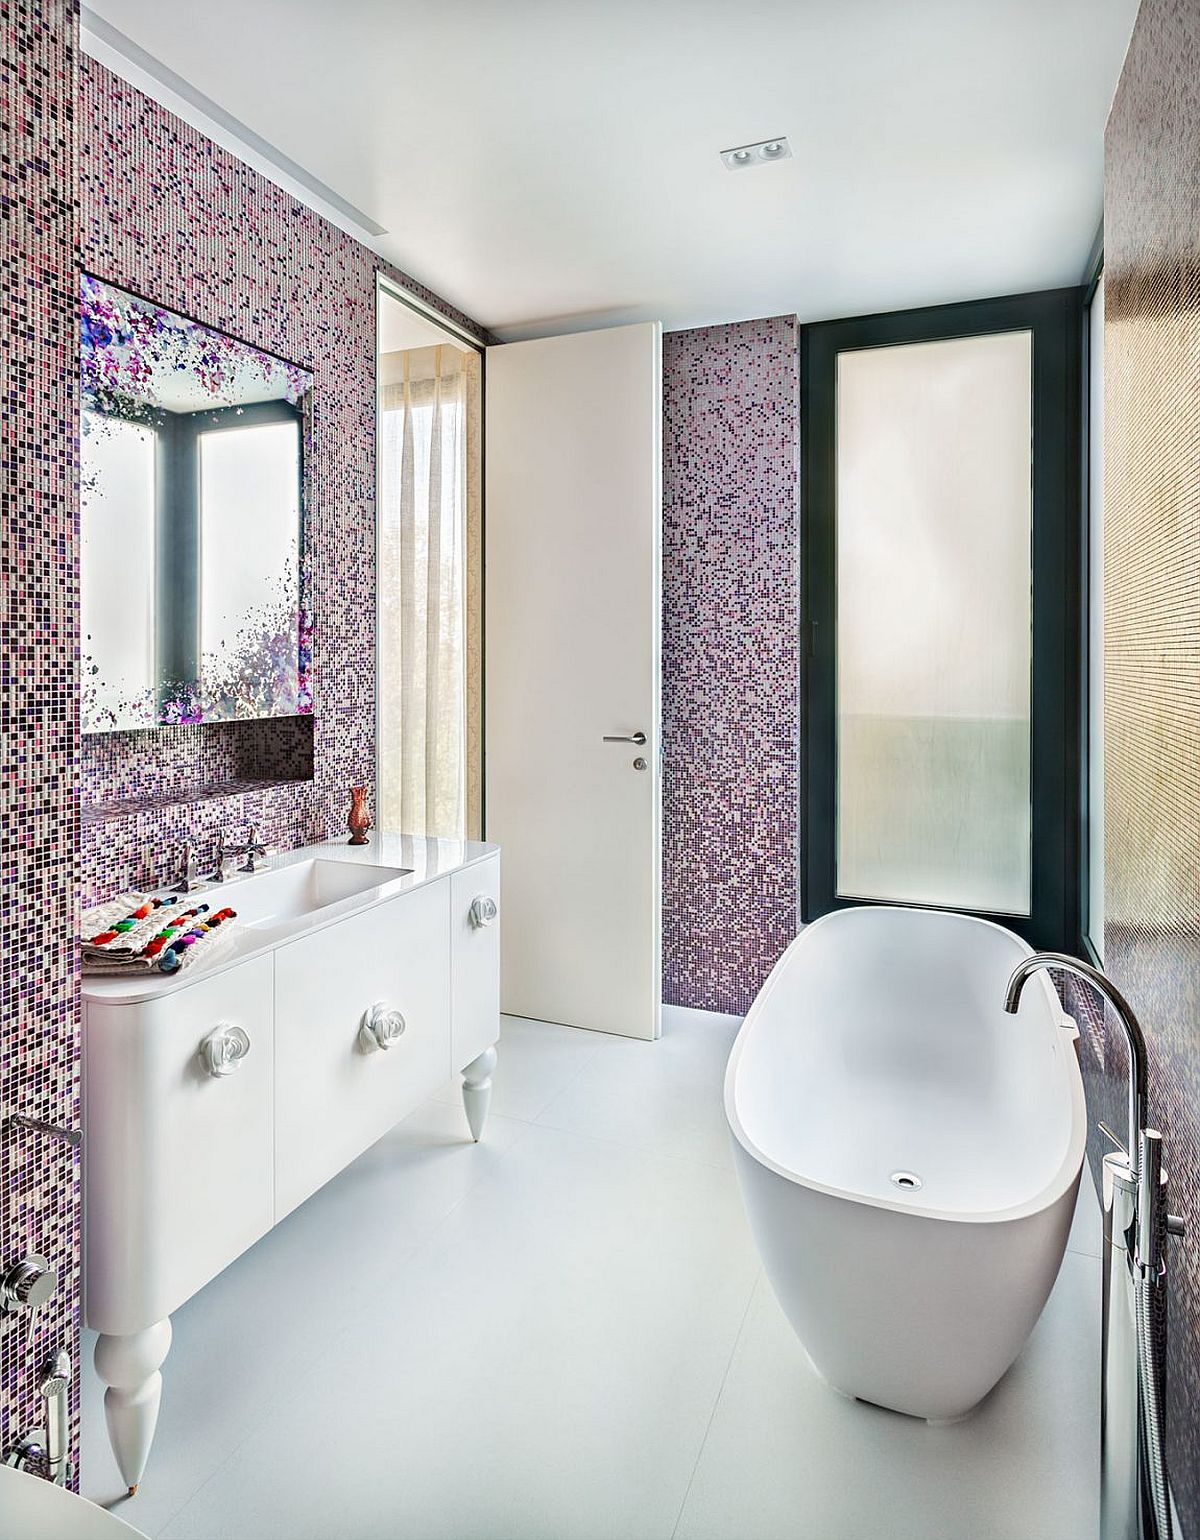 Stunning contemporary bathroom with standalone bathtub and tiles that usher in shades of violet